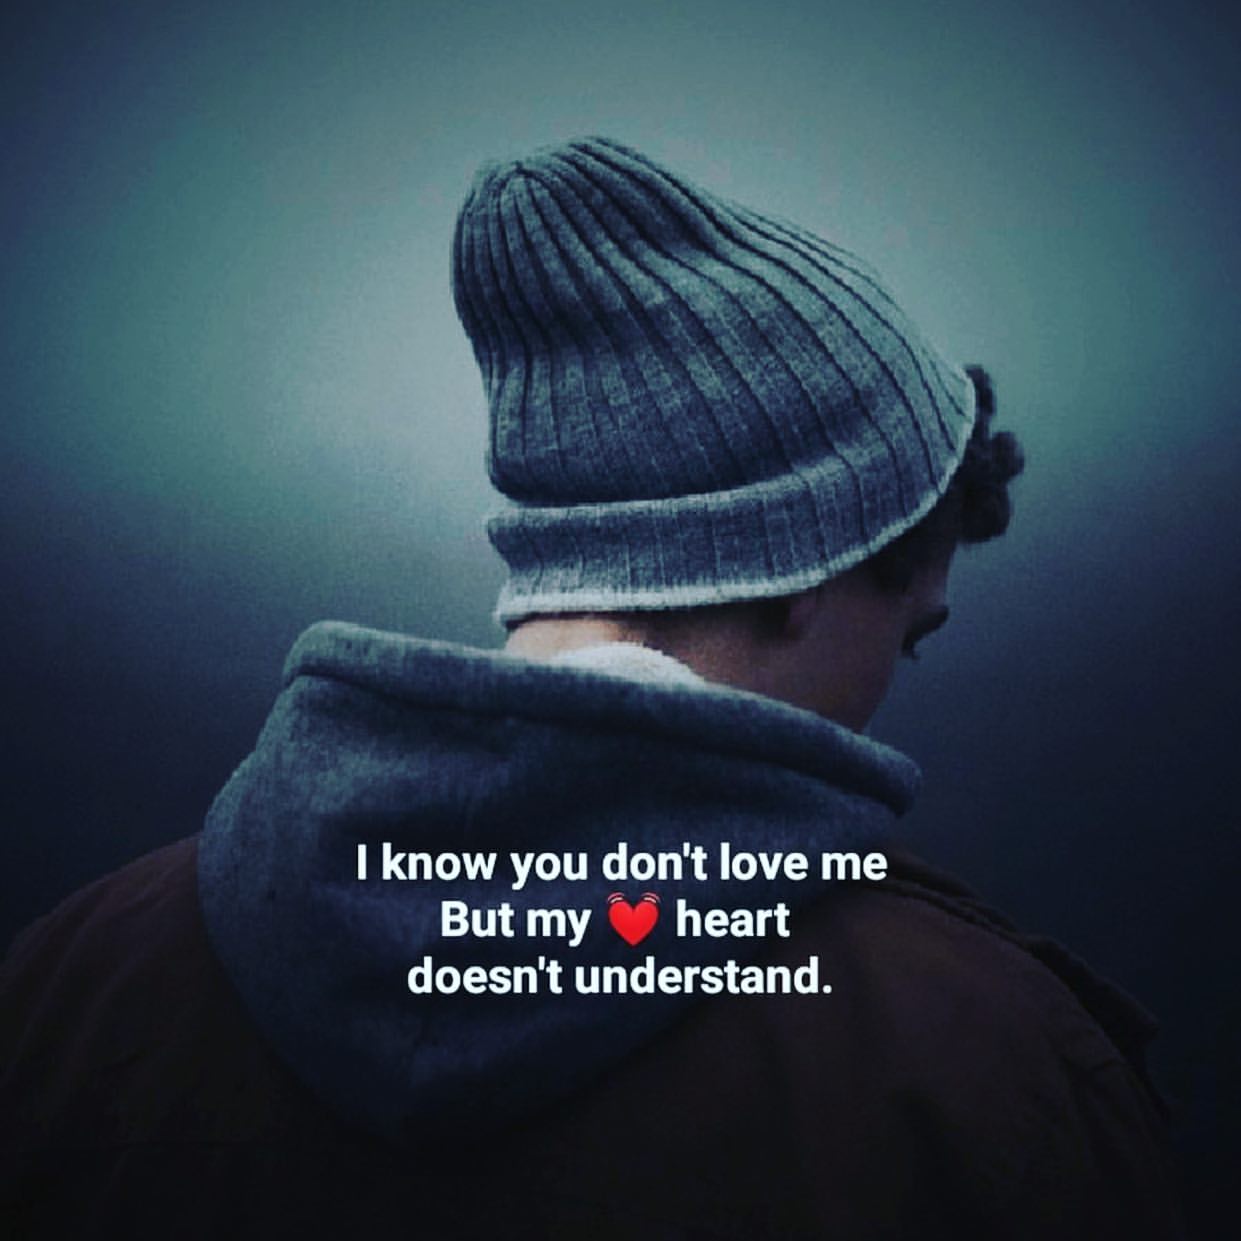 I know you don't love me. But my heart doesn't understand.